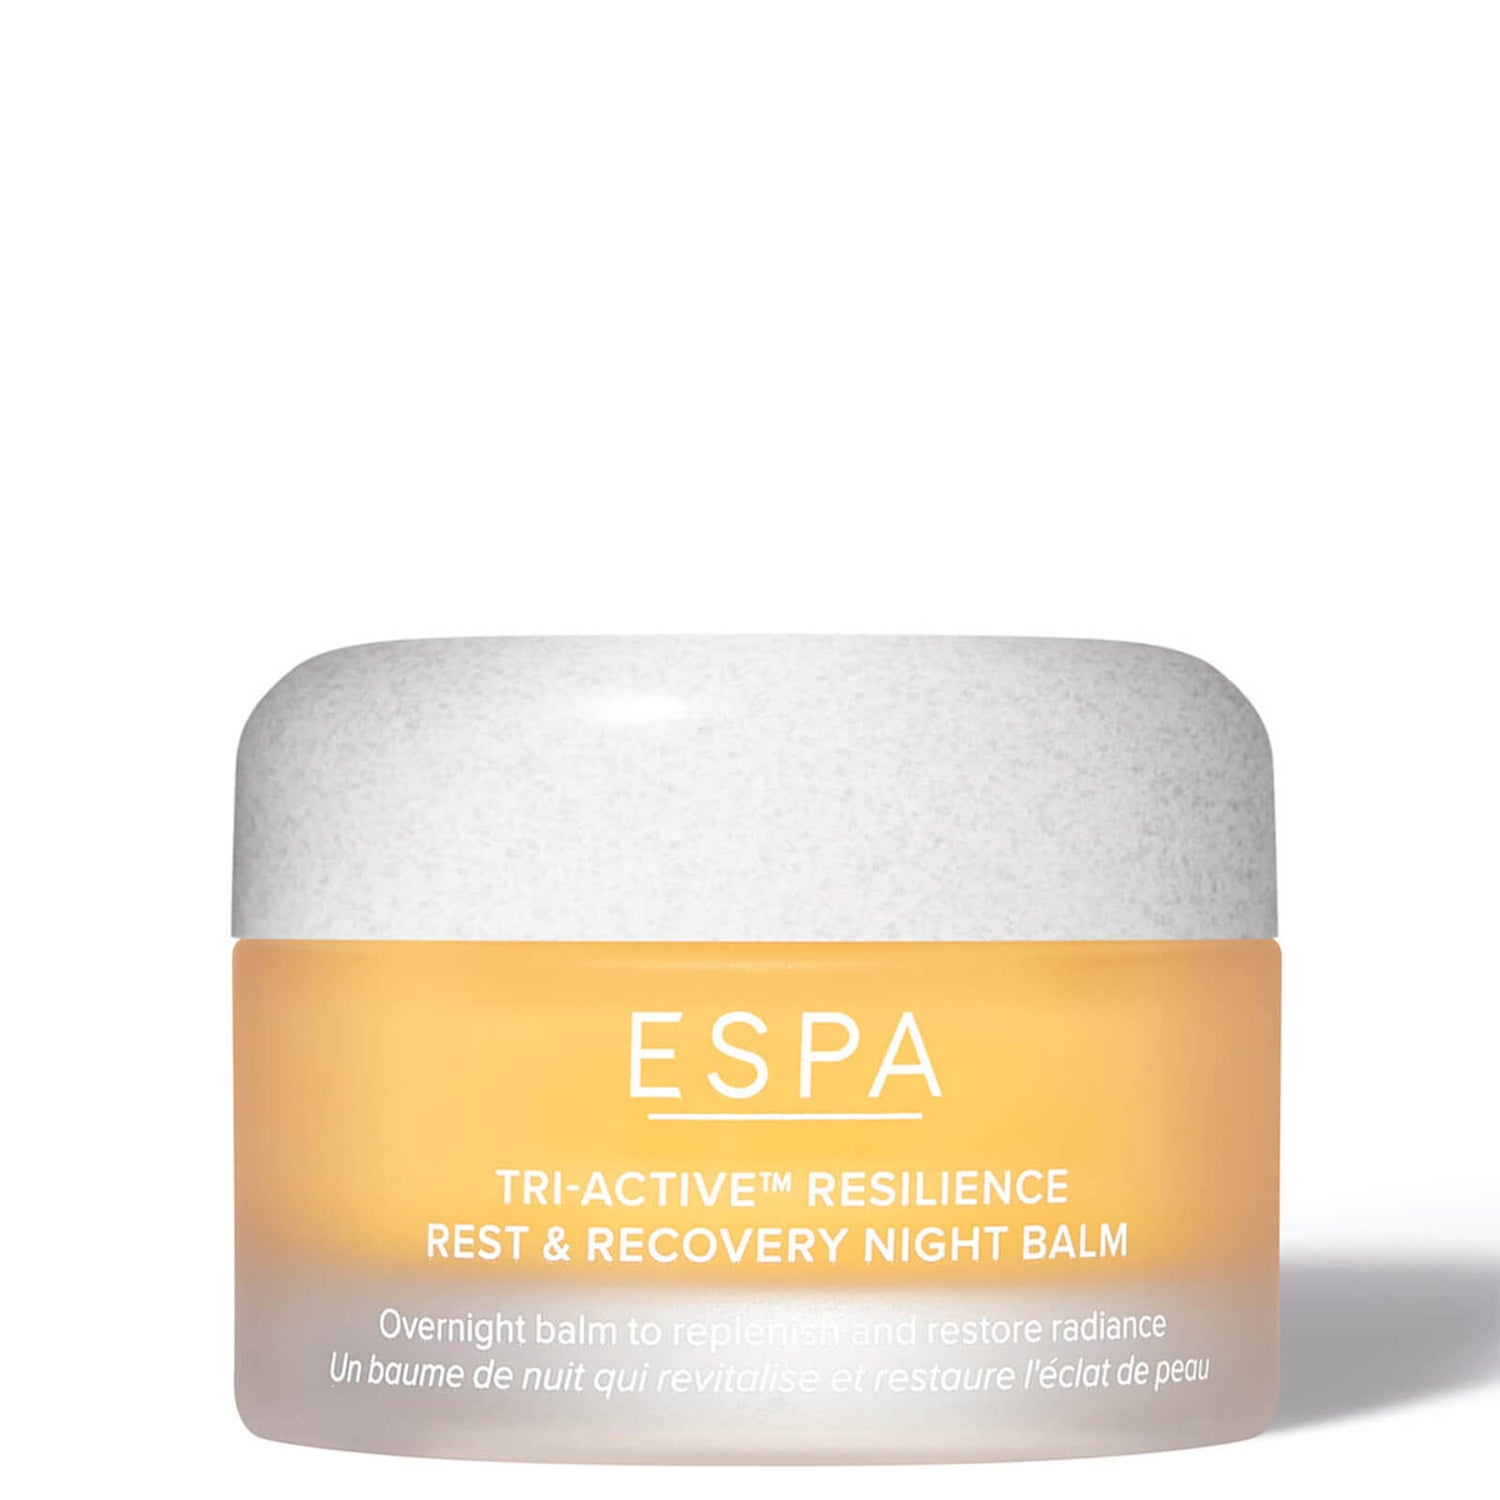 ESPA TriActive Resilience Rest Recovery Overnight Balm 1 oz.